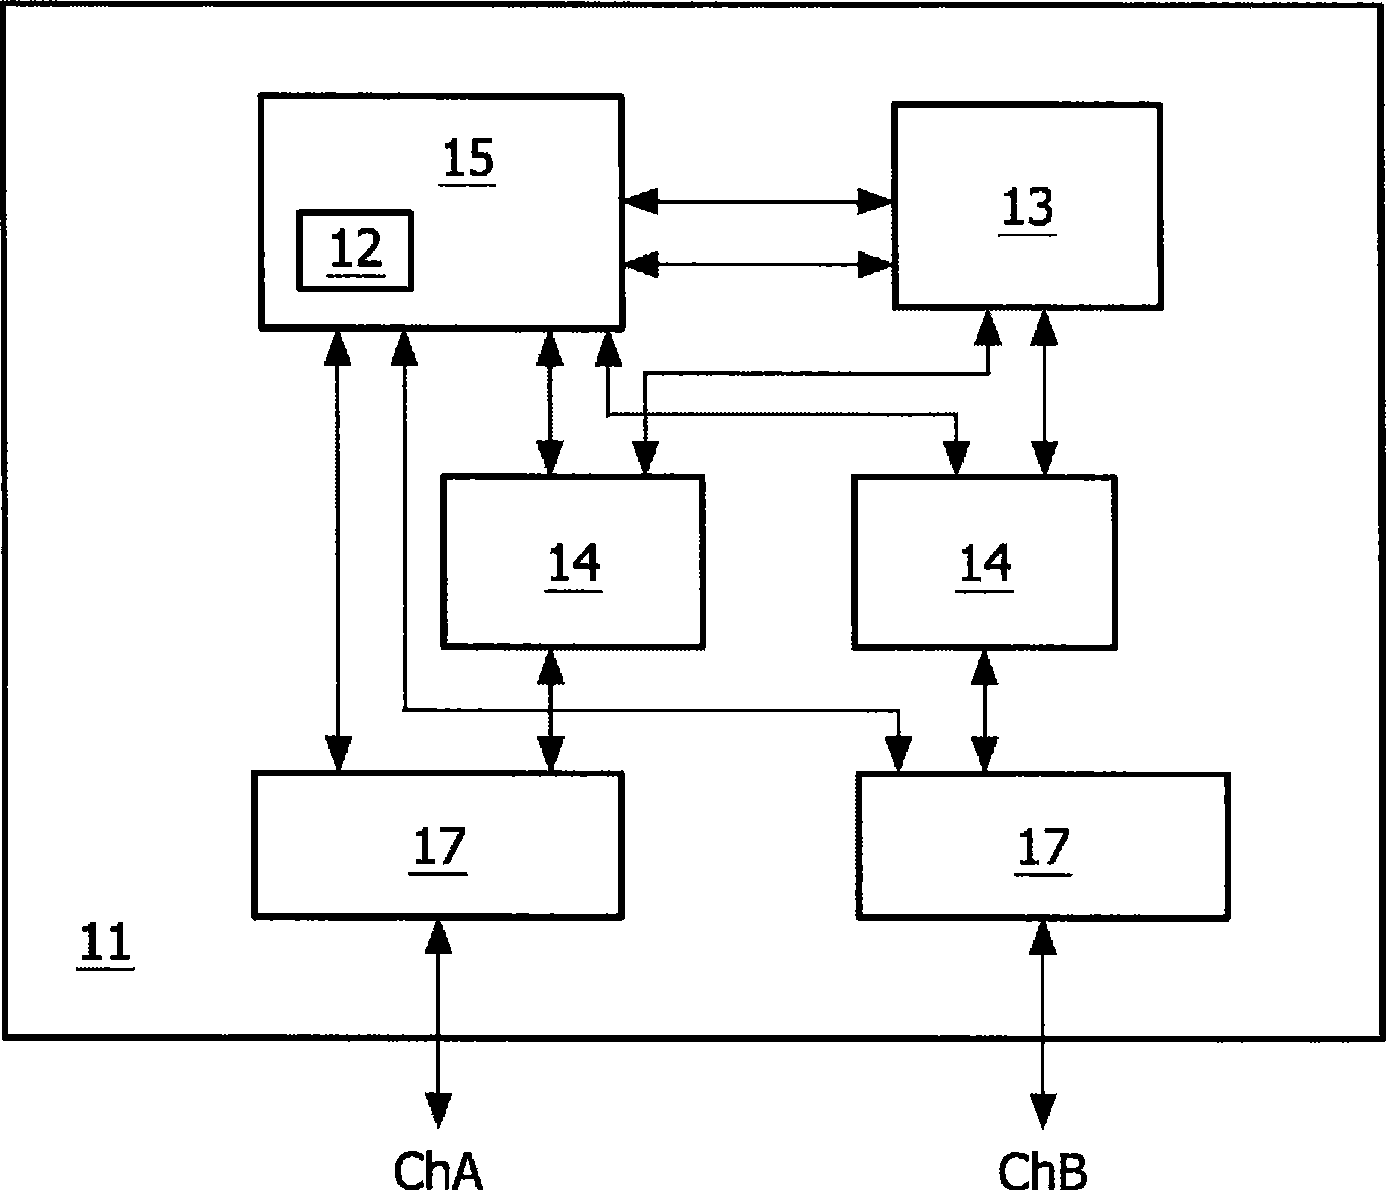 Cluster coupler in a time triggered network